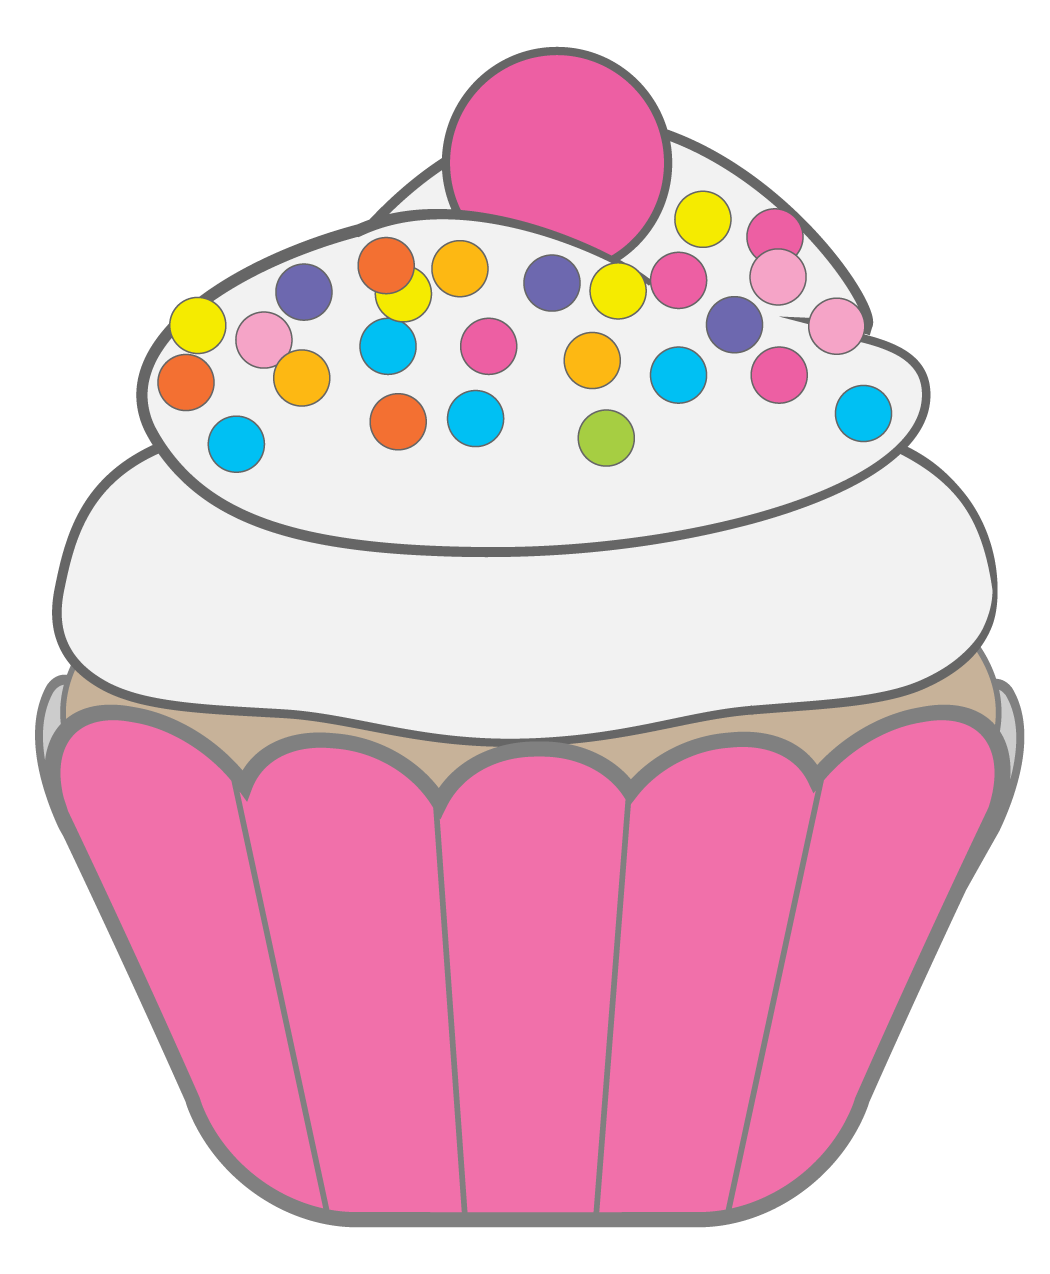 Cupcake With Sprinkles Clip Art Car Pictures